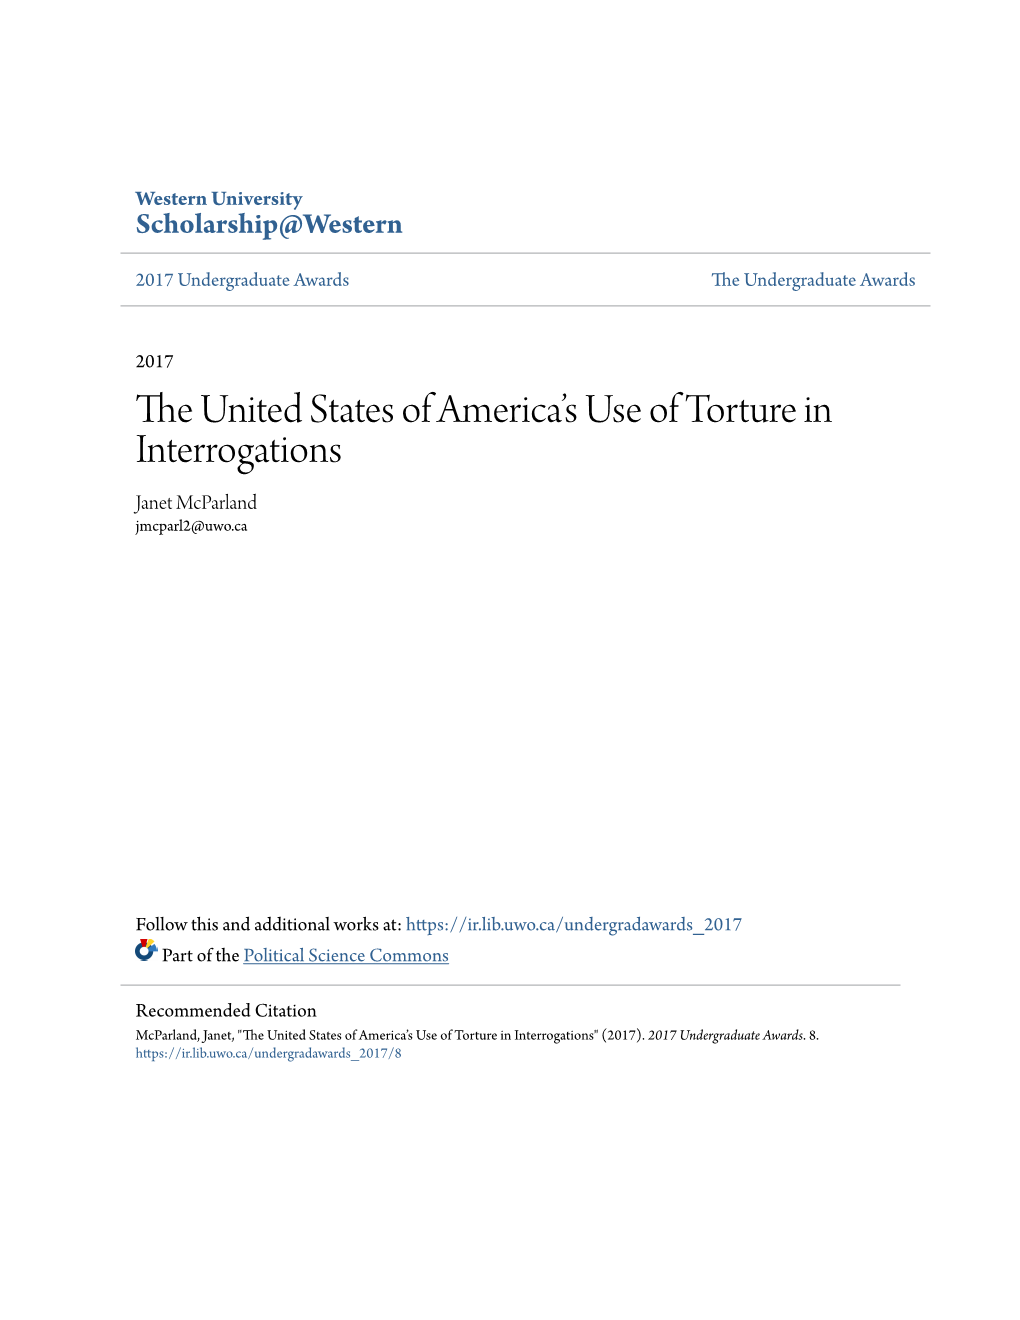 The United States of America's Use of Torture in Interrogations